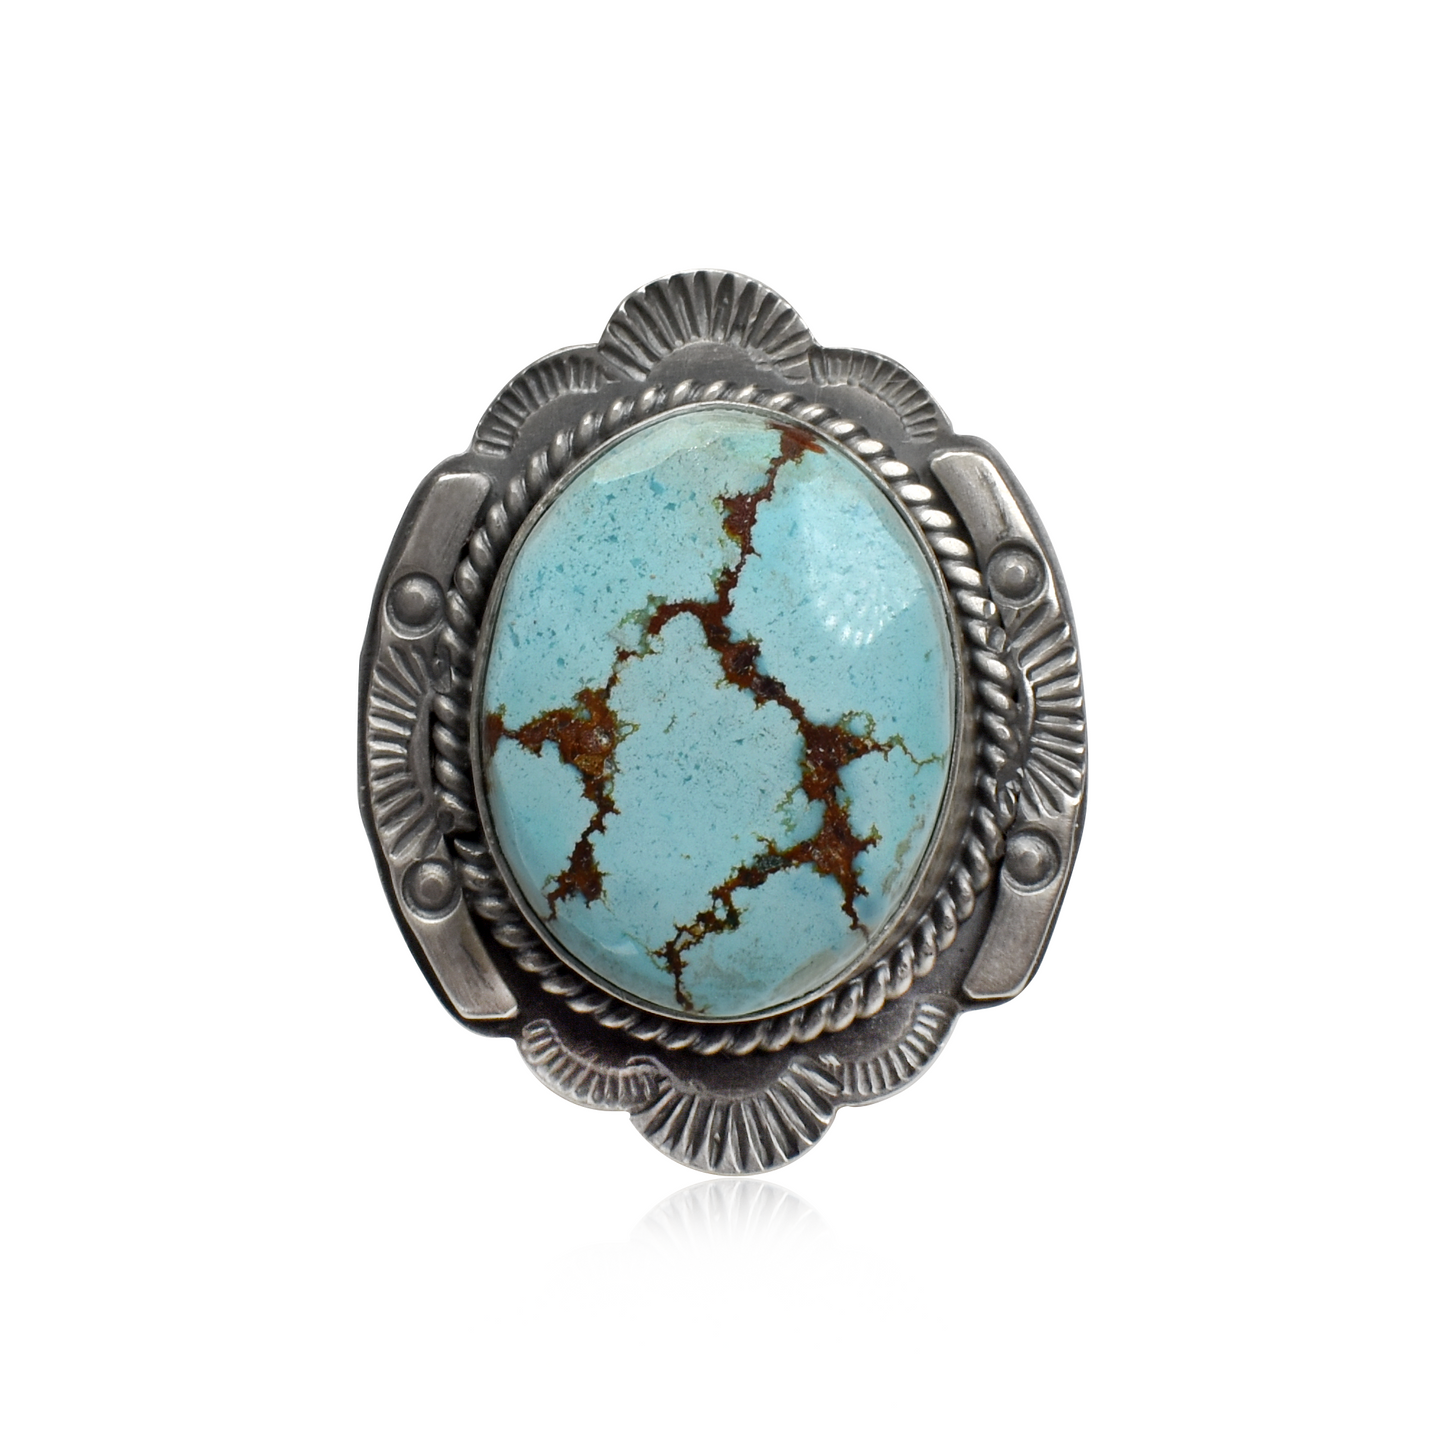 High Grade Golden Hill Turquoise Ring with Hand-Stamped Sunrays by Greg Platero